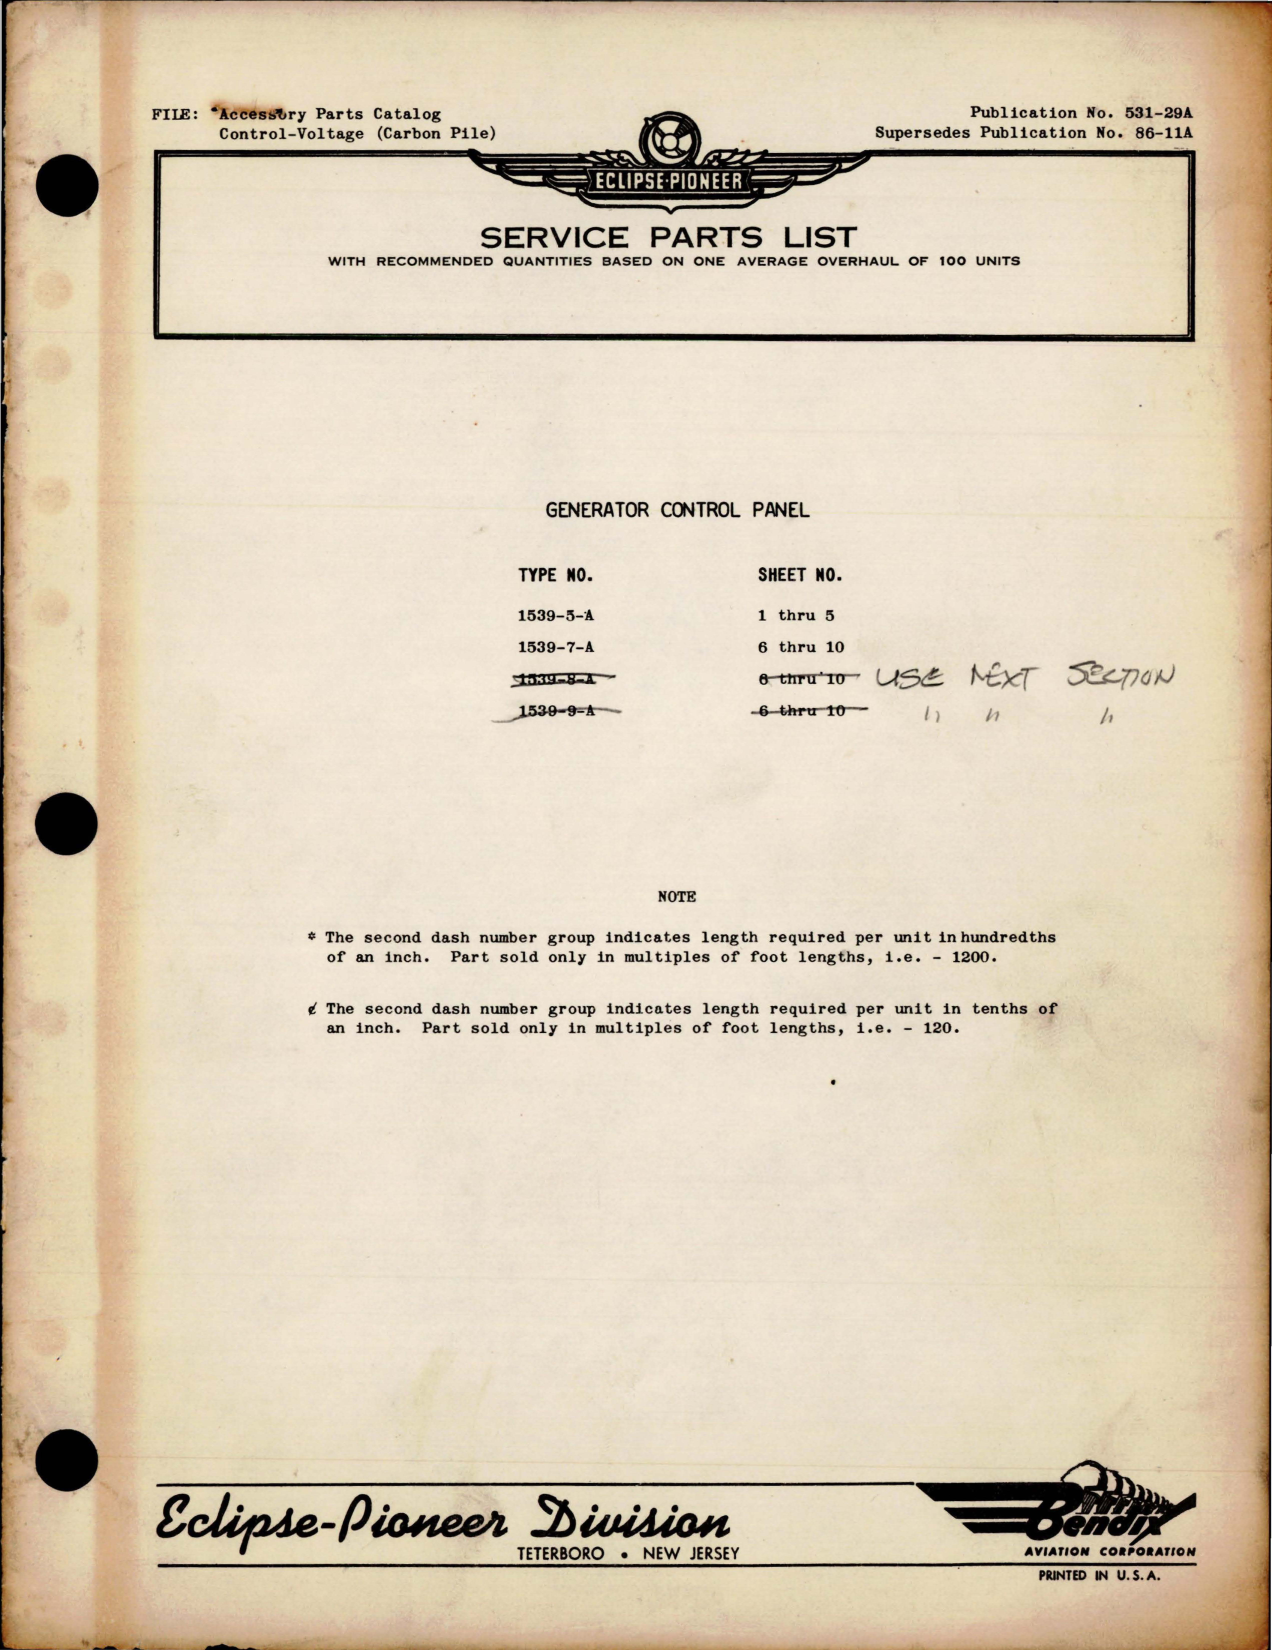 Sample page 1 from AirCorps Library document: Service Parts List for Generator Control Panels - Types 1539-5-A, 1539-7-A, 1539-8-A, and 1539-9-A 